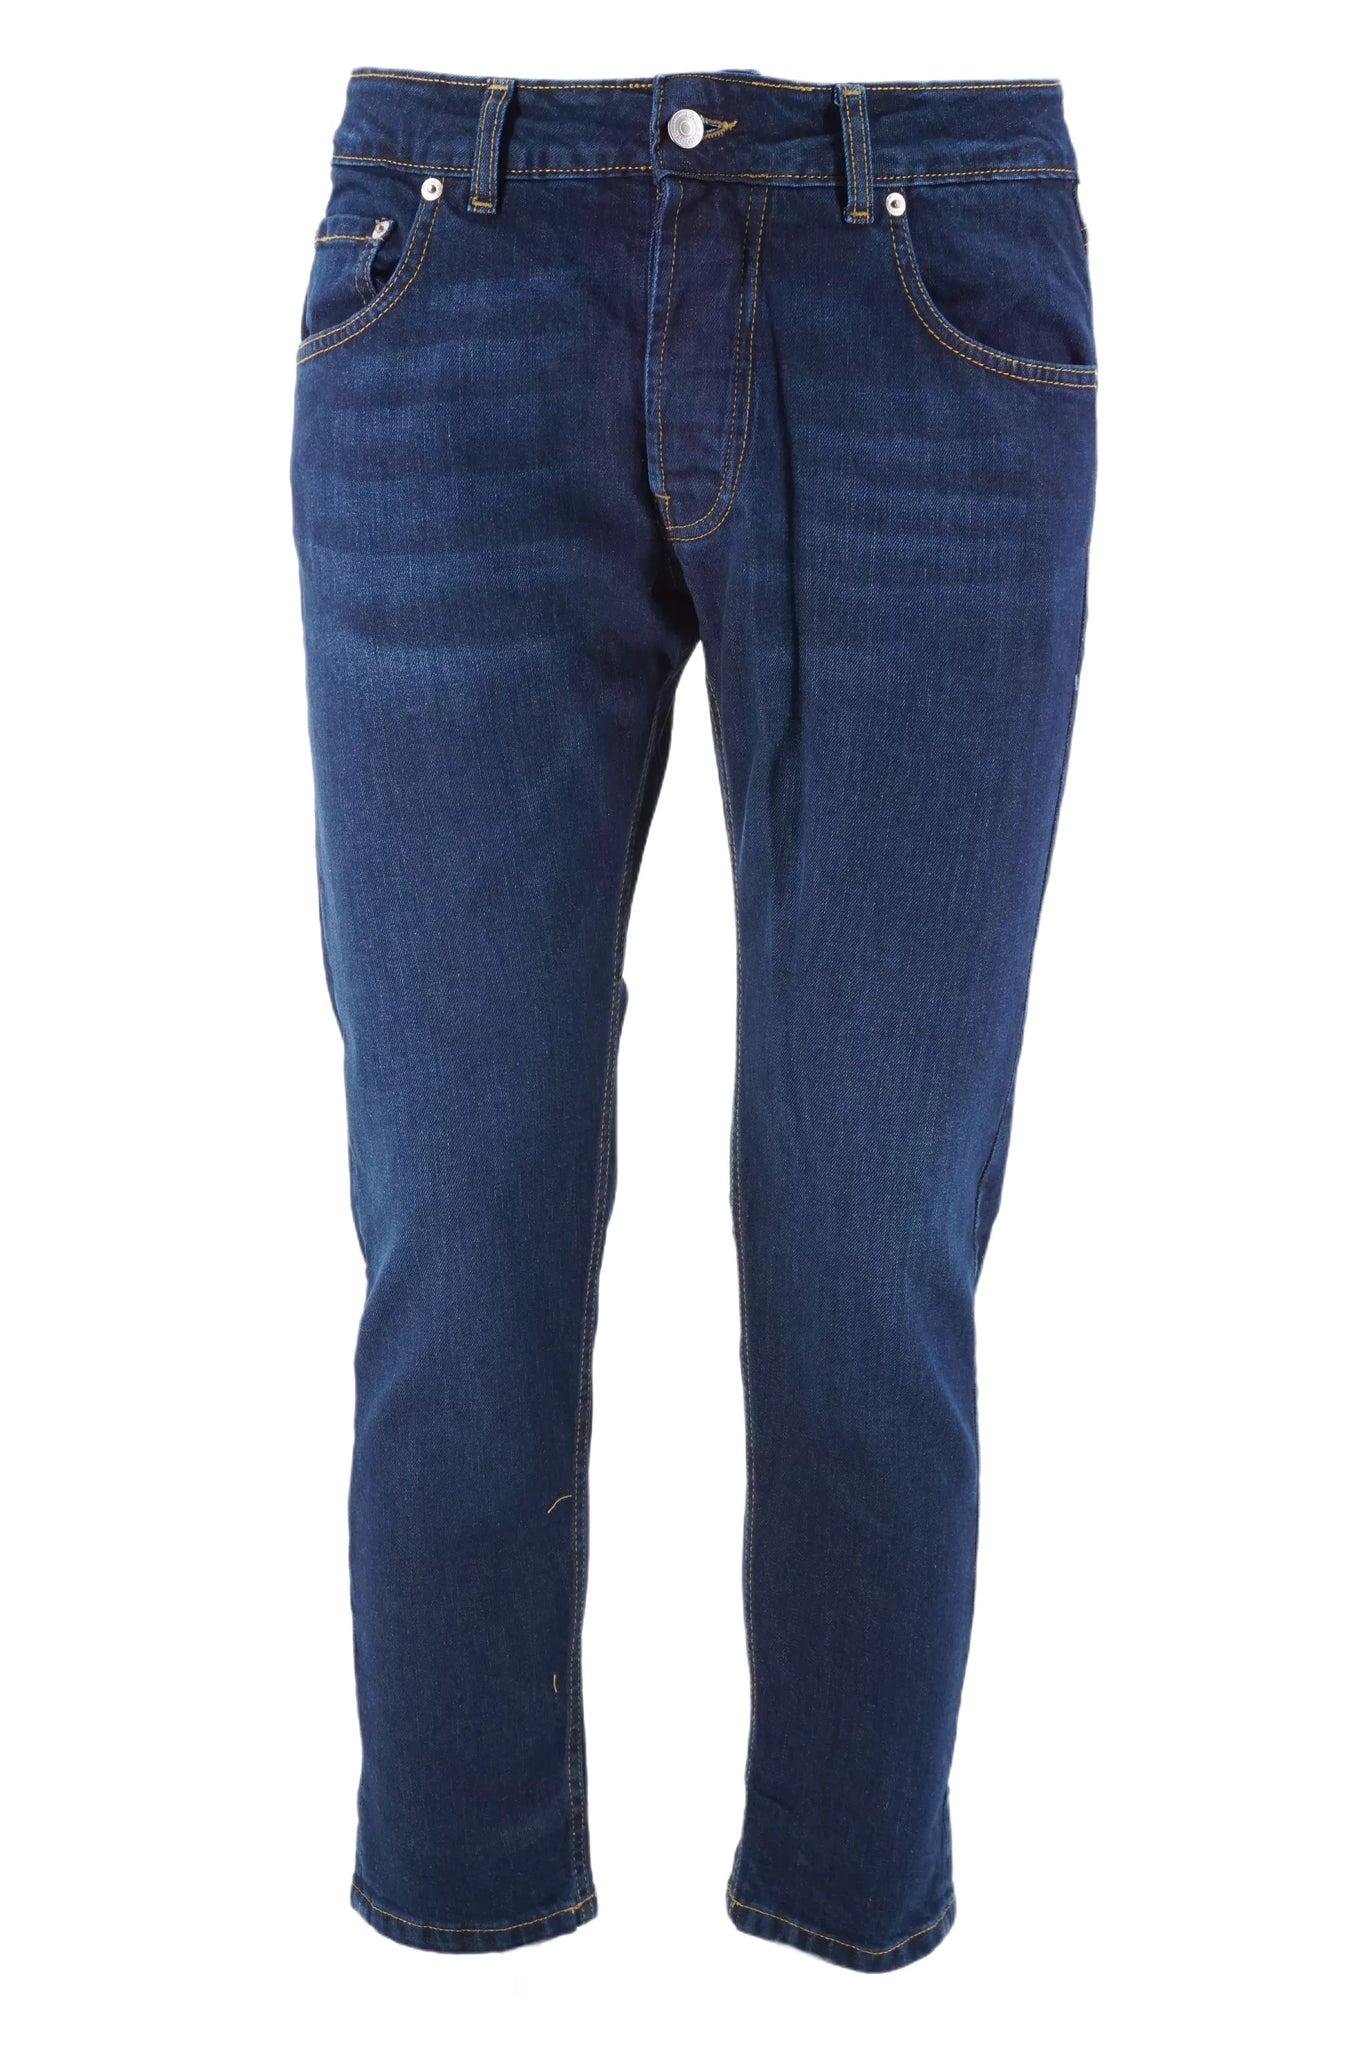 Jeans Slim Fit Labelruote / Jeans - Ideal Moda